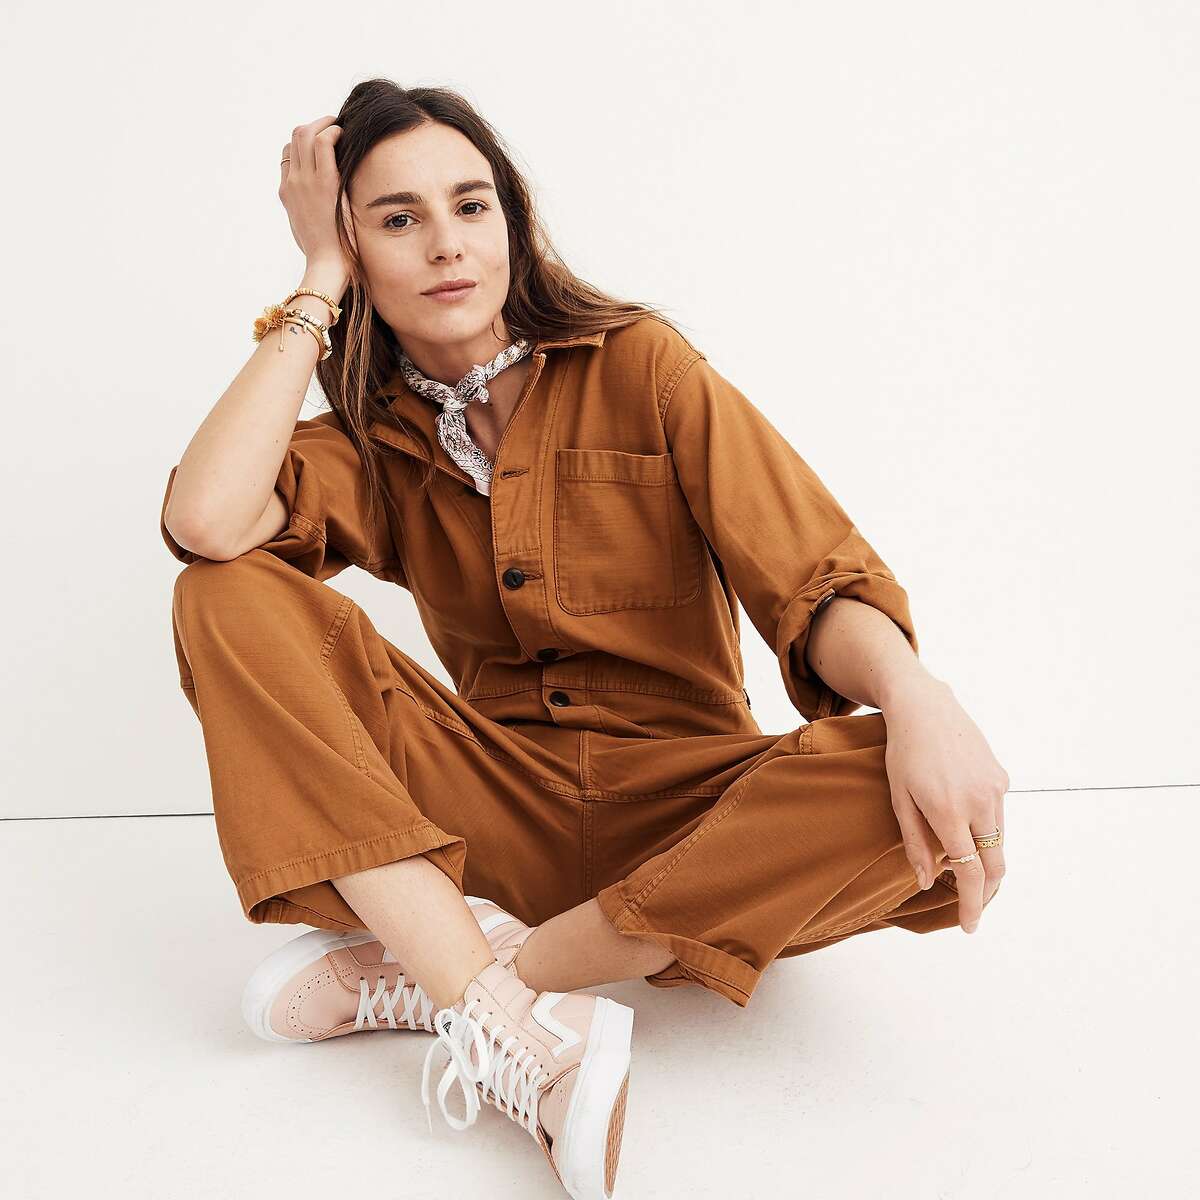 Mark Kolski�s one-of-a-kind vintage reconstructed jumpsuits speak to the Madewell woman�artful, timelessly cool, and a bit of a tomboy ($175-$350, Madewell, 850 Market Street, S.F.)